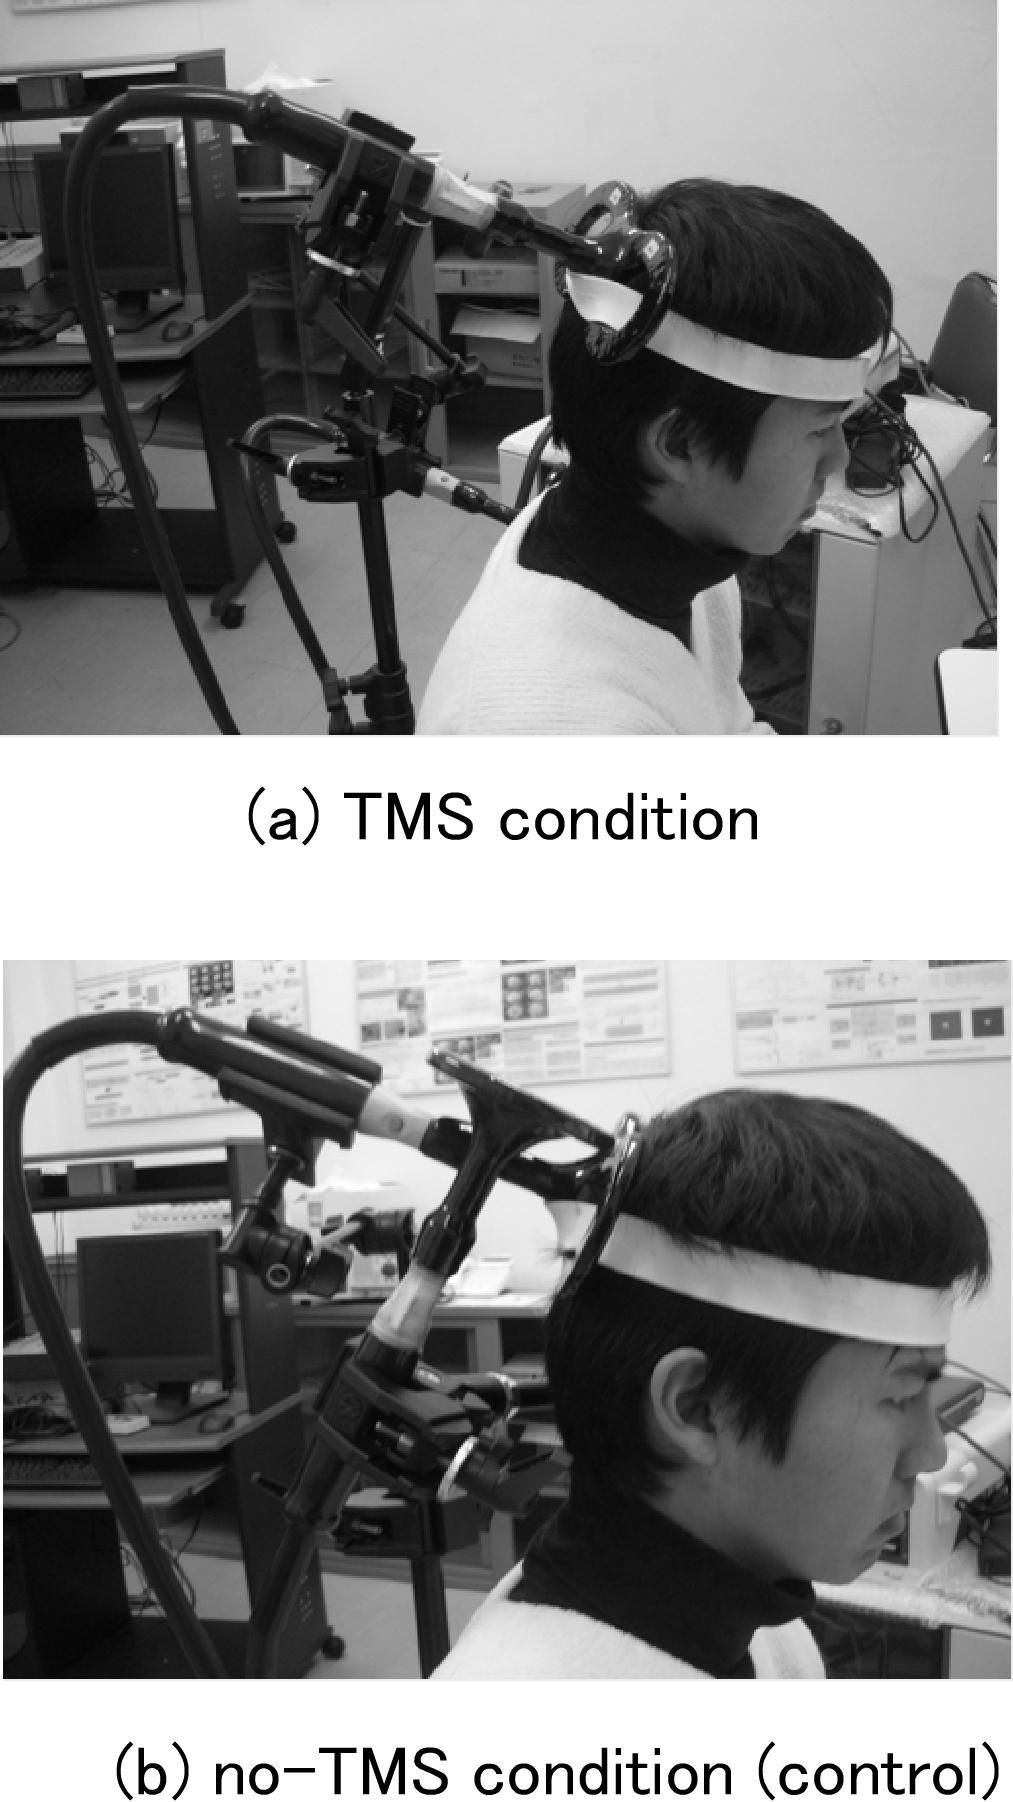 INTERNATIONAL JOURNAL OF APPLIED BIOMEDICAL ENGINEERING VOL.2, NO.2 2009 3 Fig.2: TMs coil was applied over the right posterior parietal cortex.